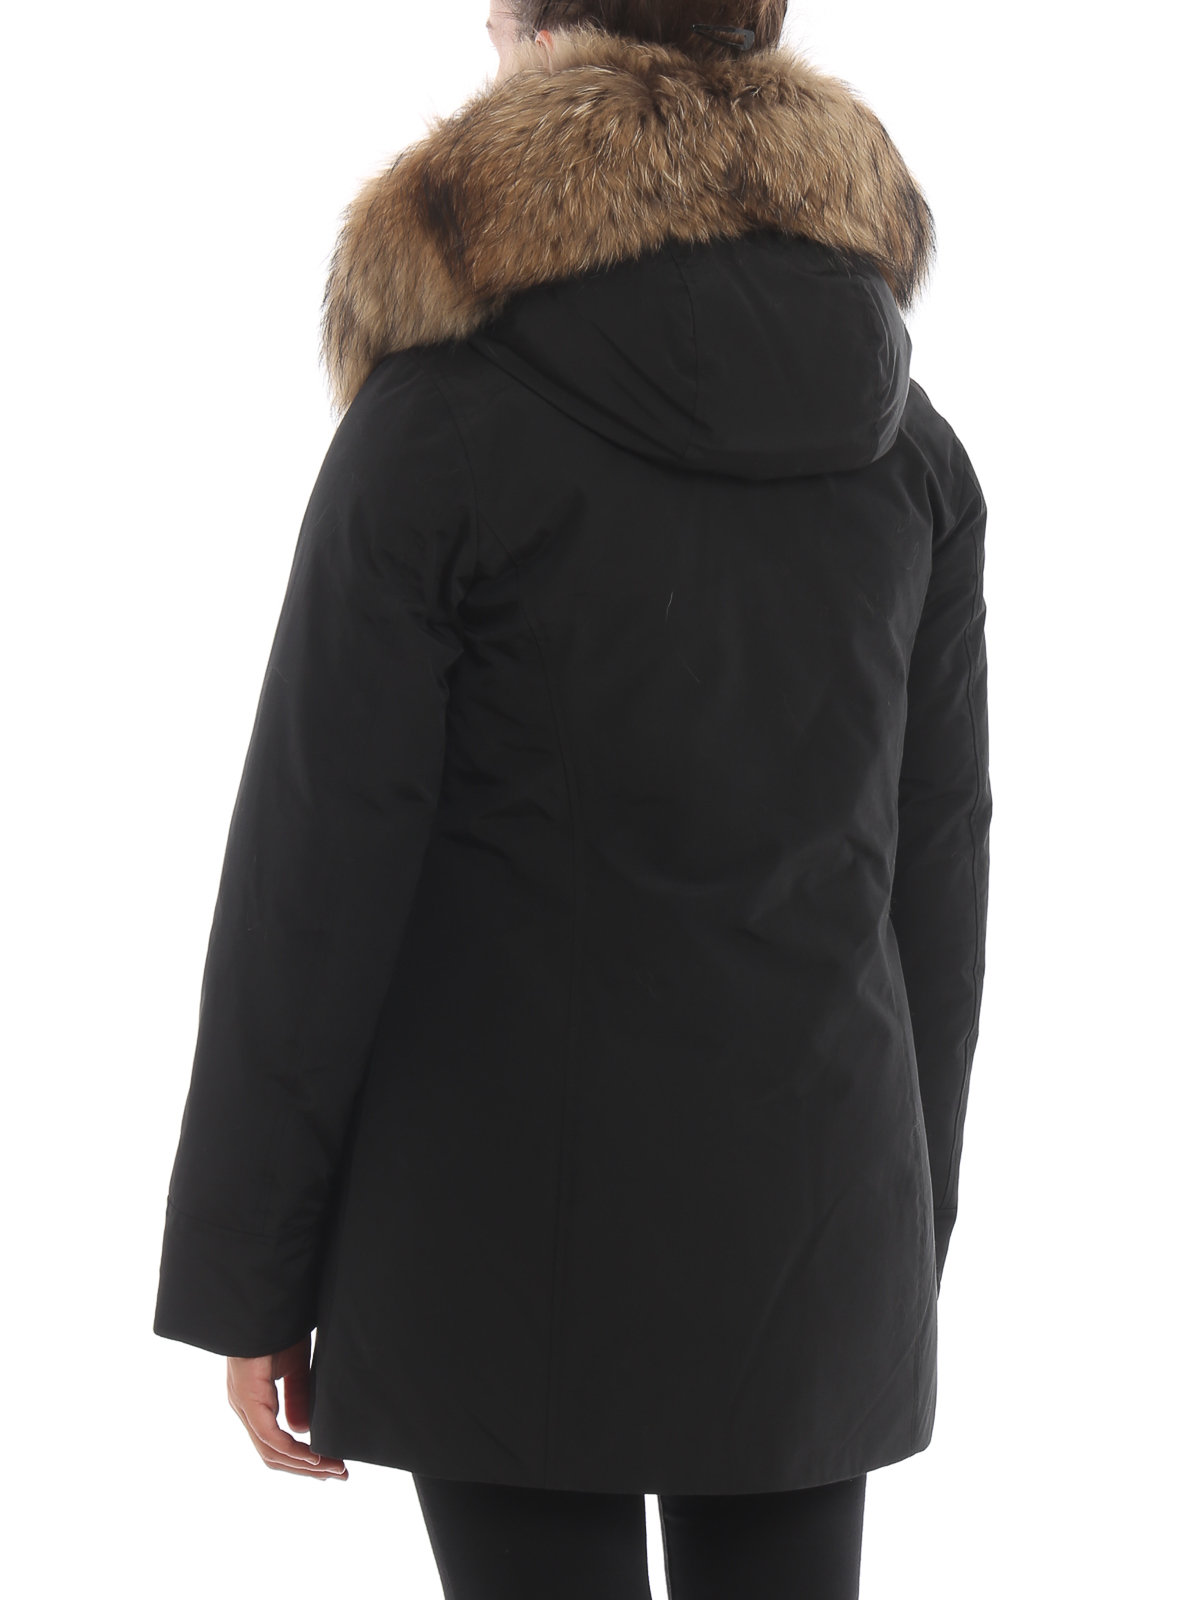 Drank staan micro Padded coats Woolrich - Arctic Parka black padded coat - WWCPS2762UT0001BLK